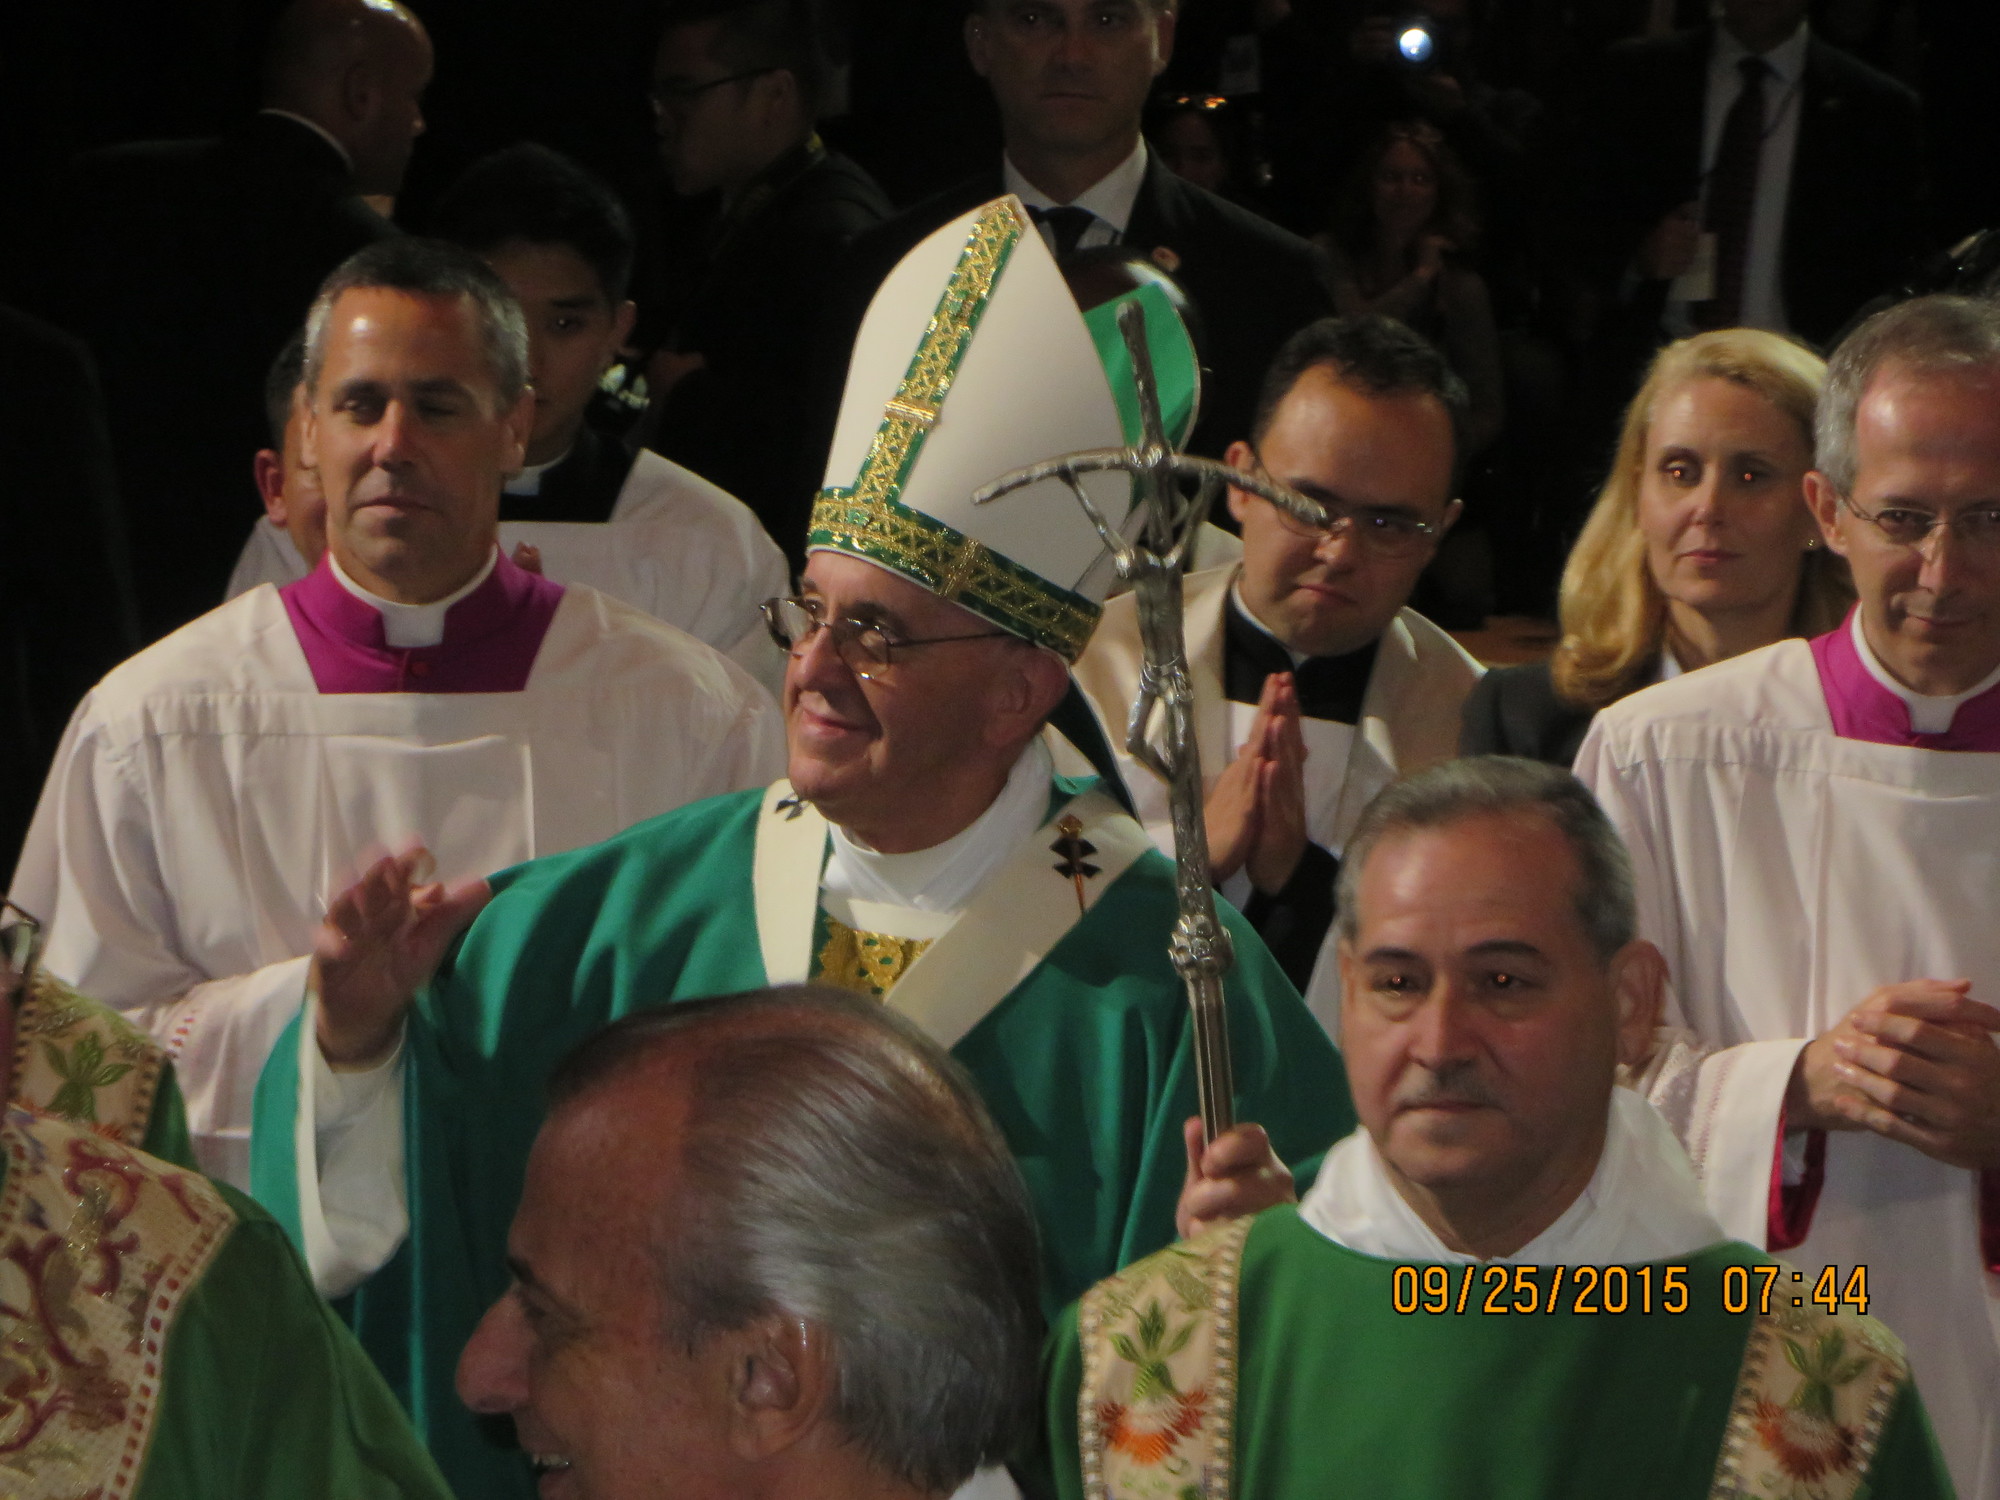 The Pope entered Madison Square Garden to the cheers of thousands of Catholics who gathered to hear him perform Mass.